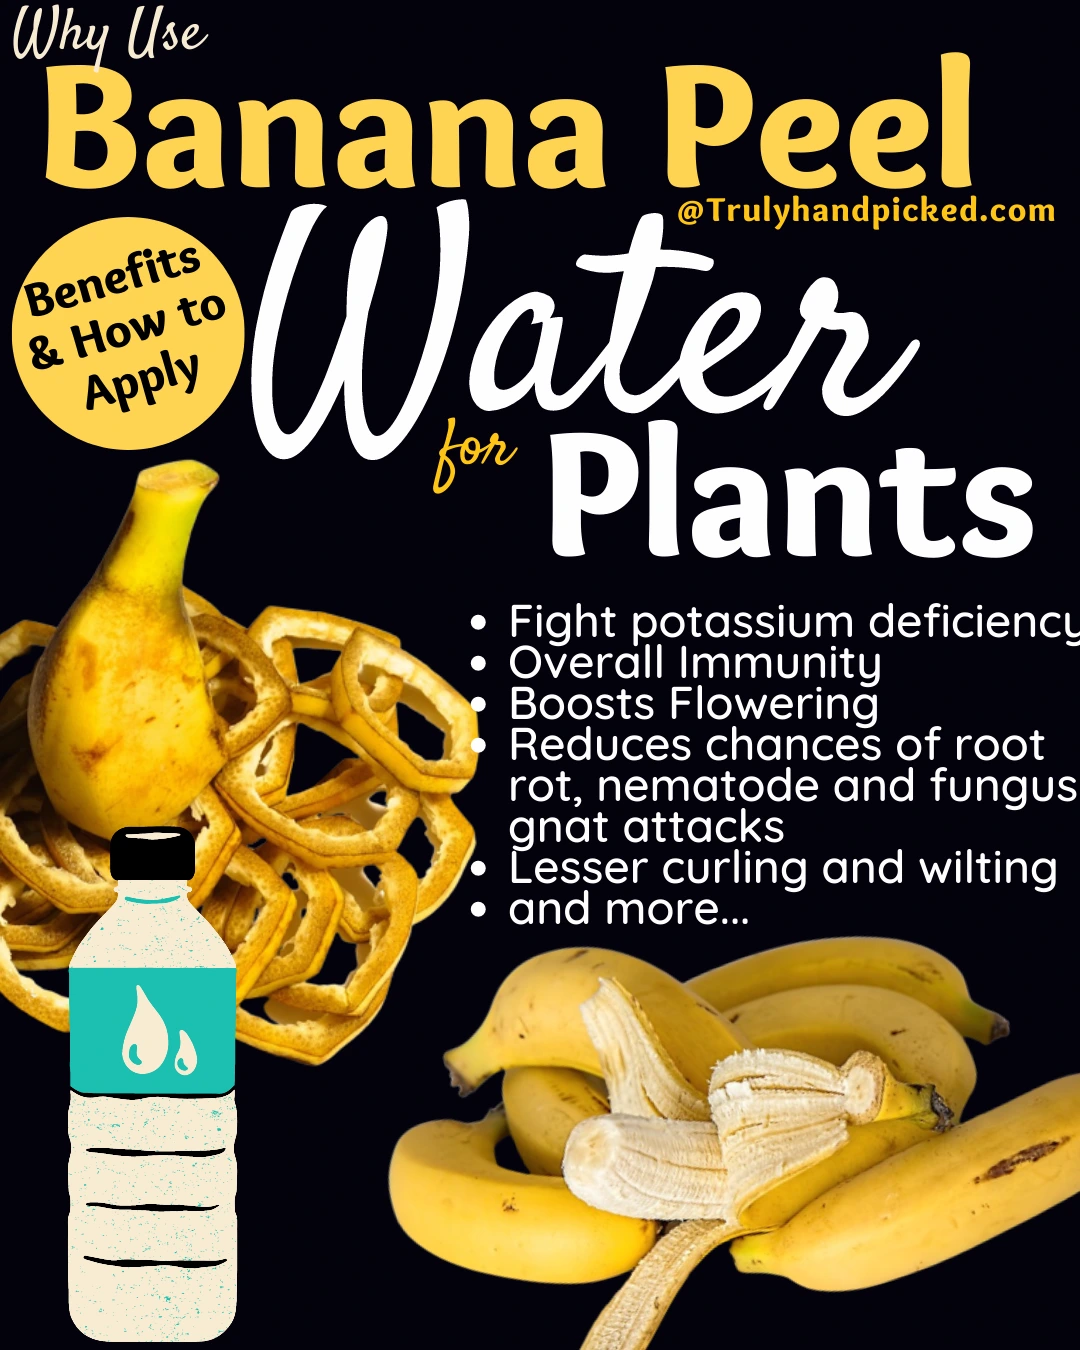 Benefits of using Banana Peel Water for Plants How to Use